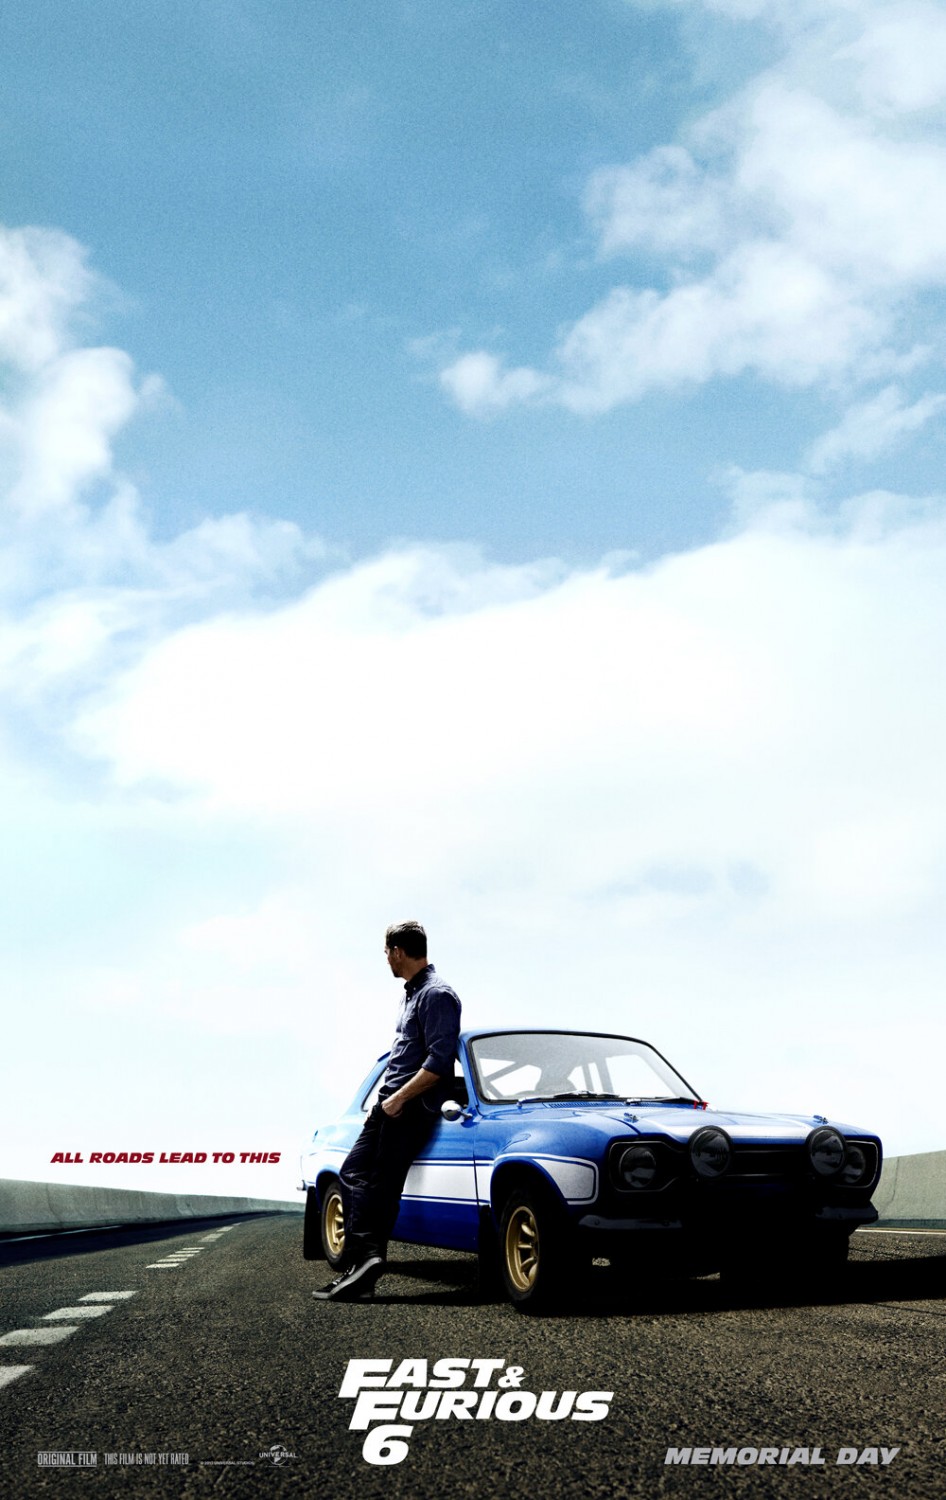 Extra Large Movie Poster Image for Fast & Furious 6 (#2 of 7)